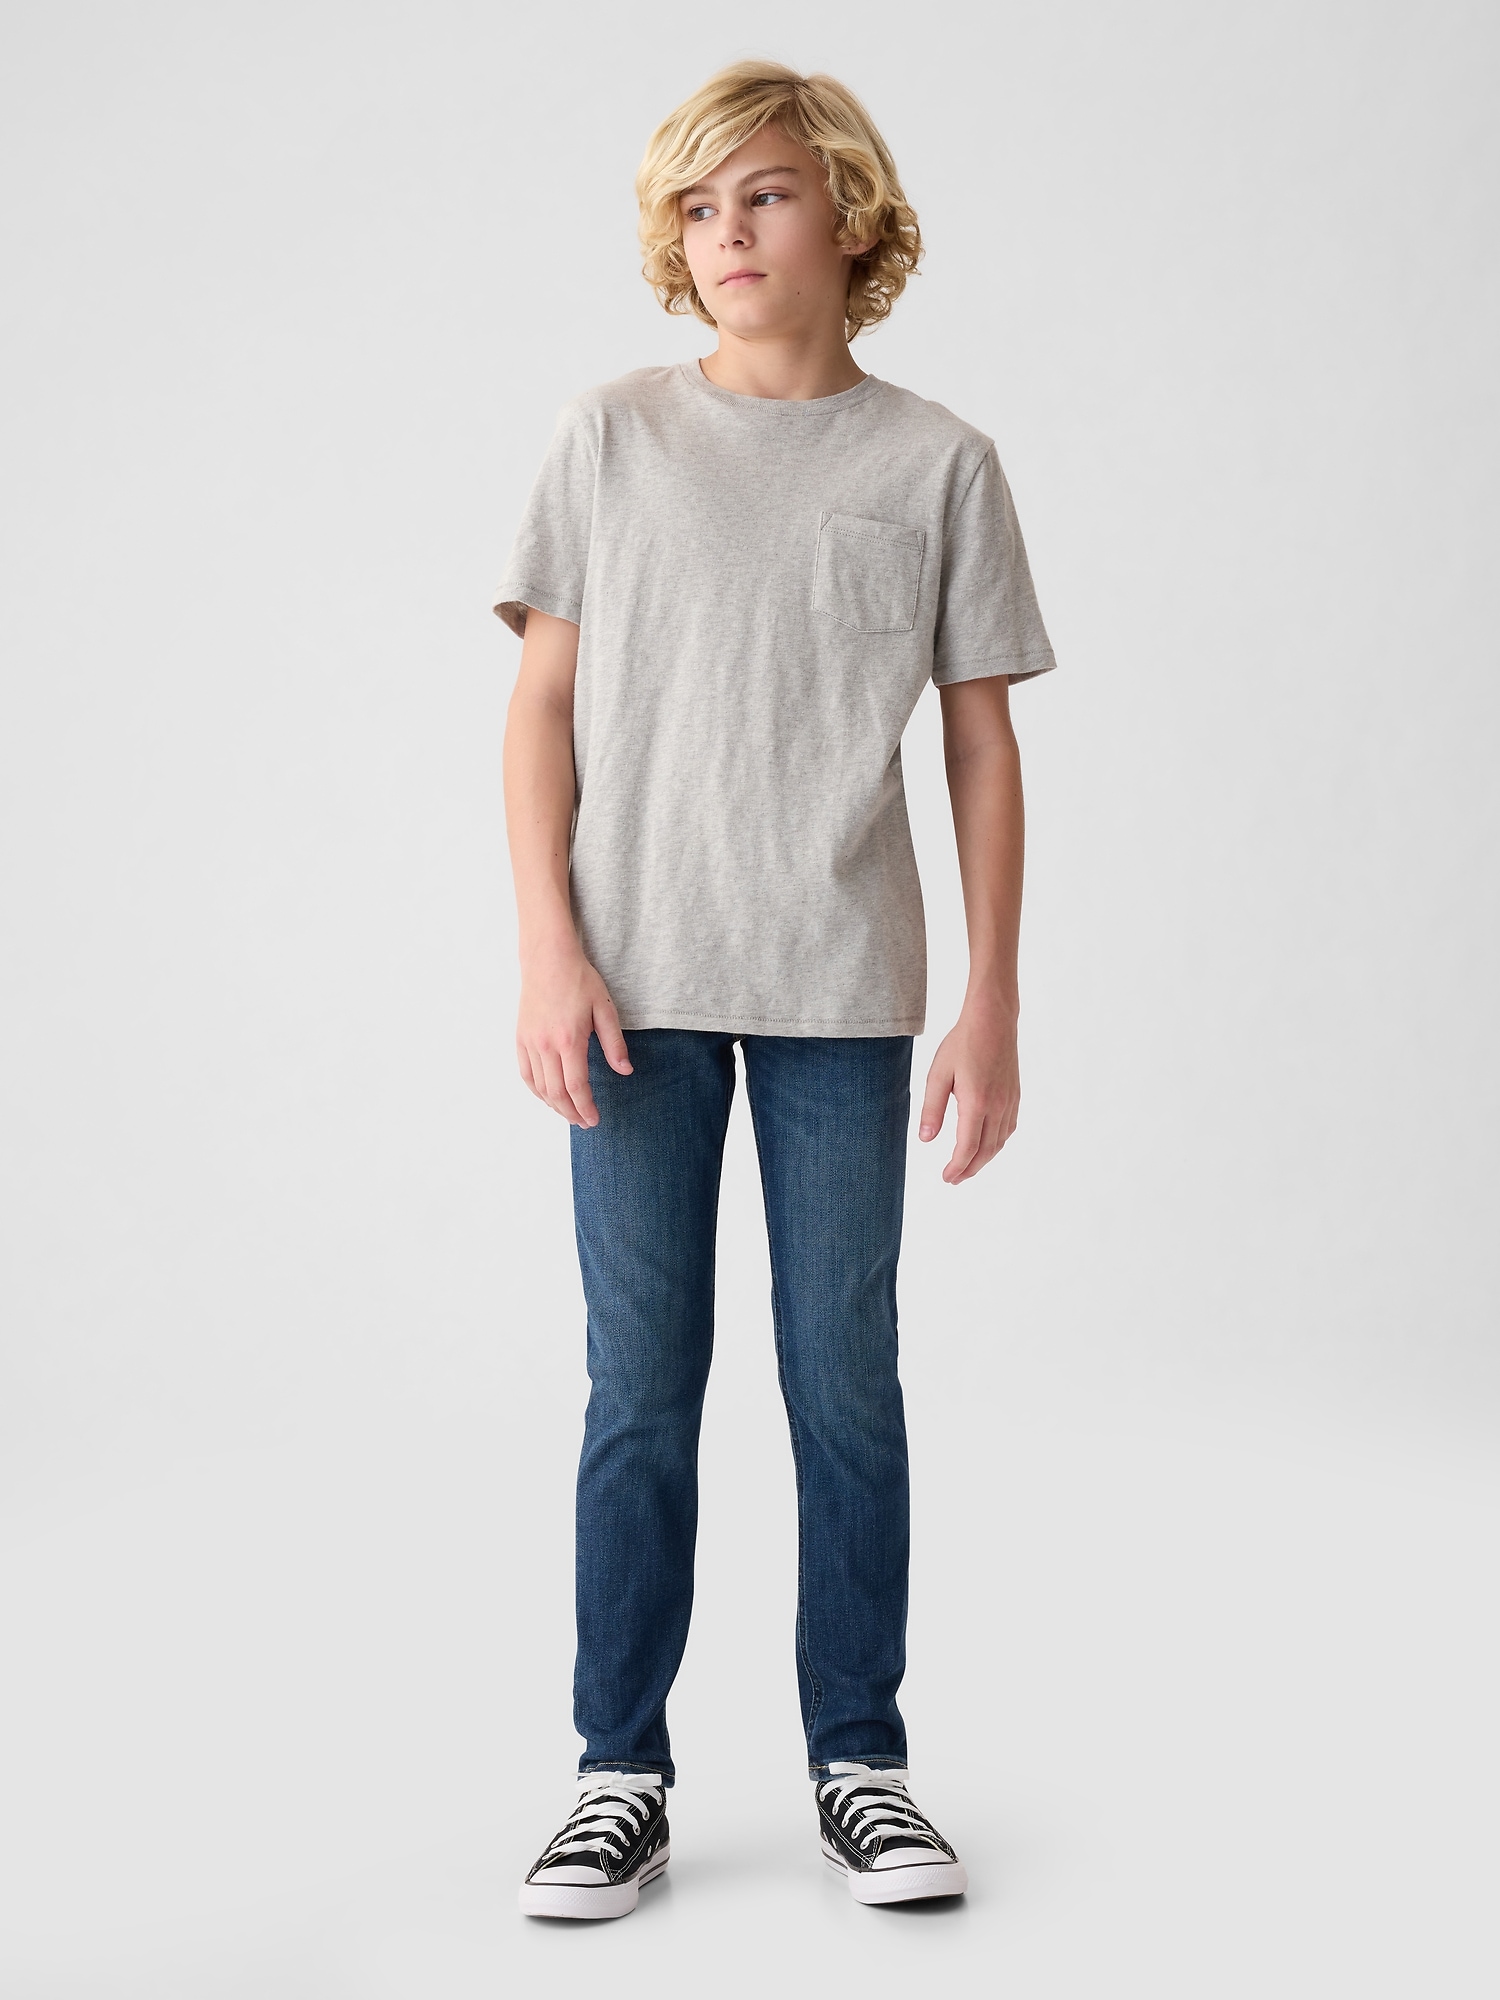  GAP Boys Skinny Fit Jeans, Light Wash, 5 US: Clothing, Shoes &  Jewelry